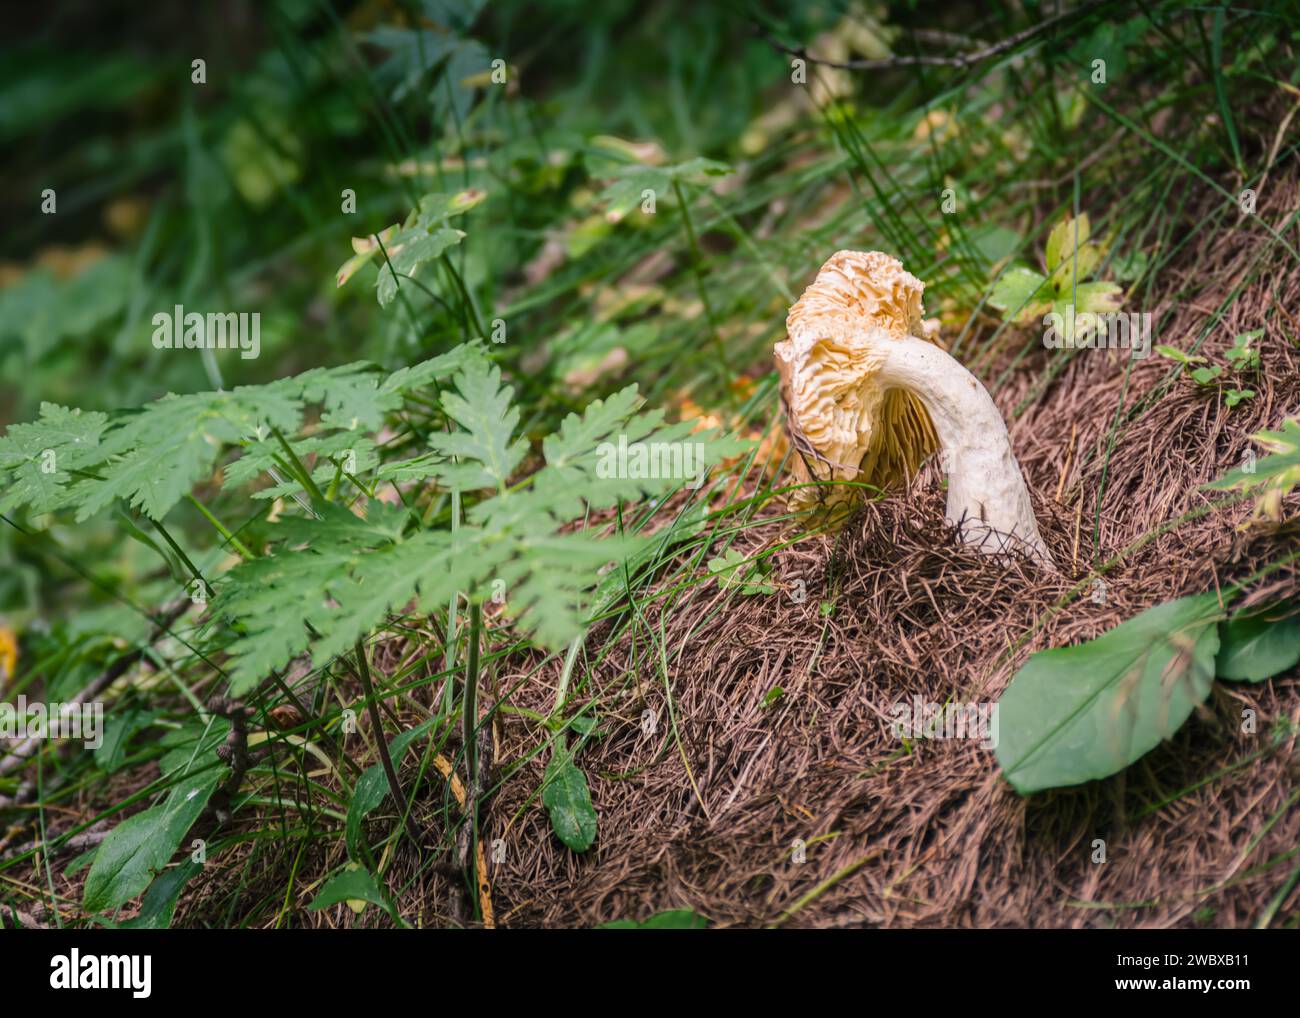 Mushroom amidst green foliage surrounded by various types of green plants including fern-like leaves and grasses on a ground covered with pine needles Stock Photo